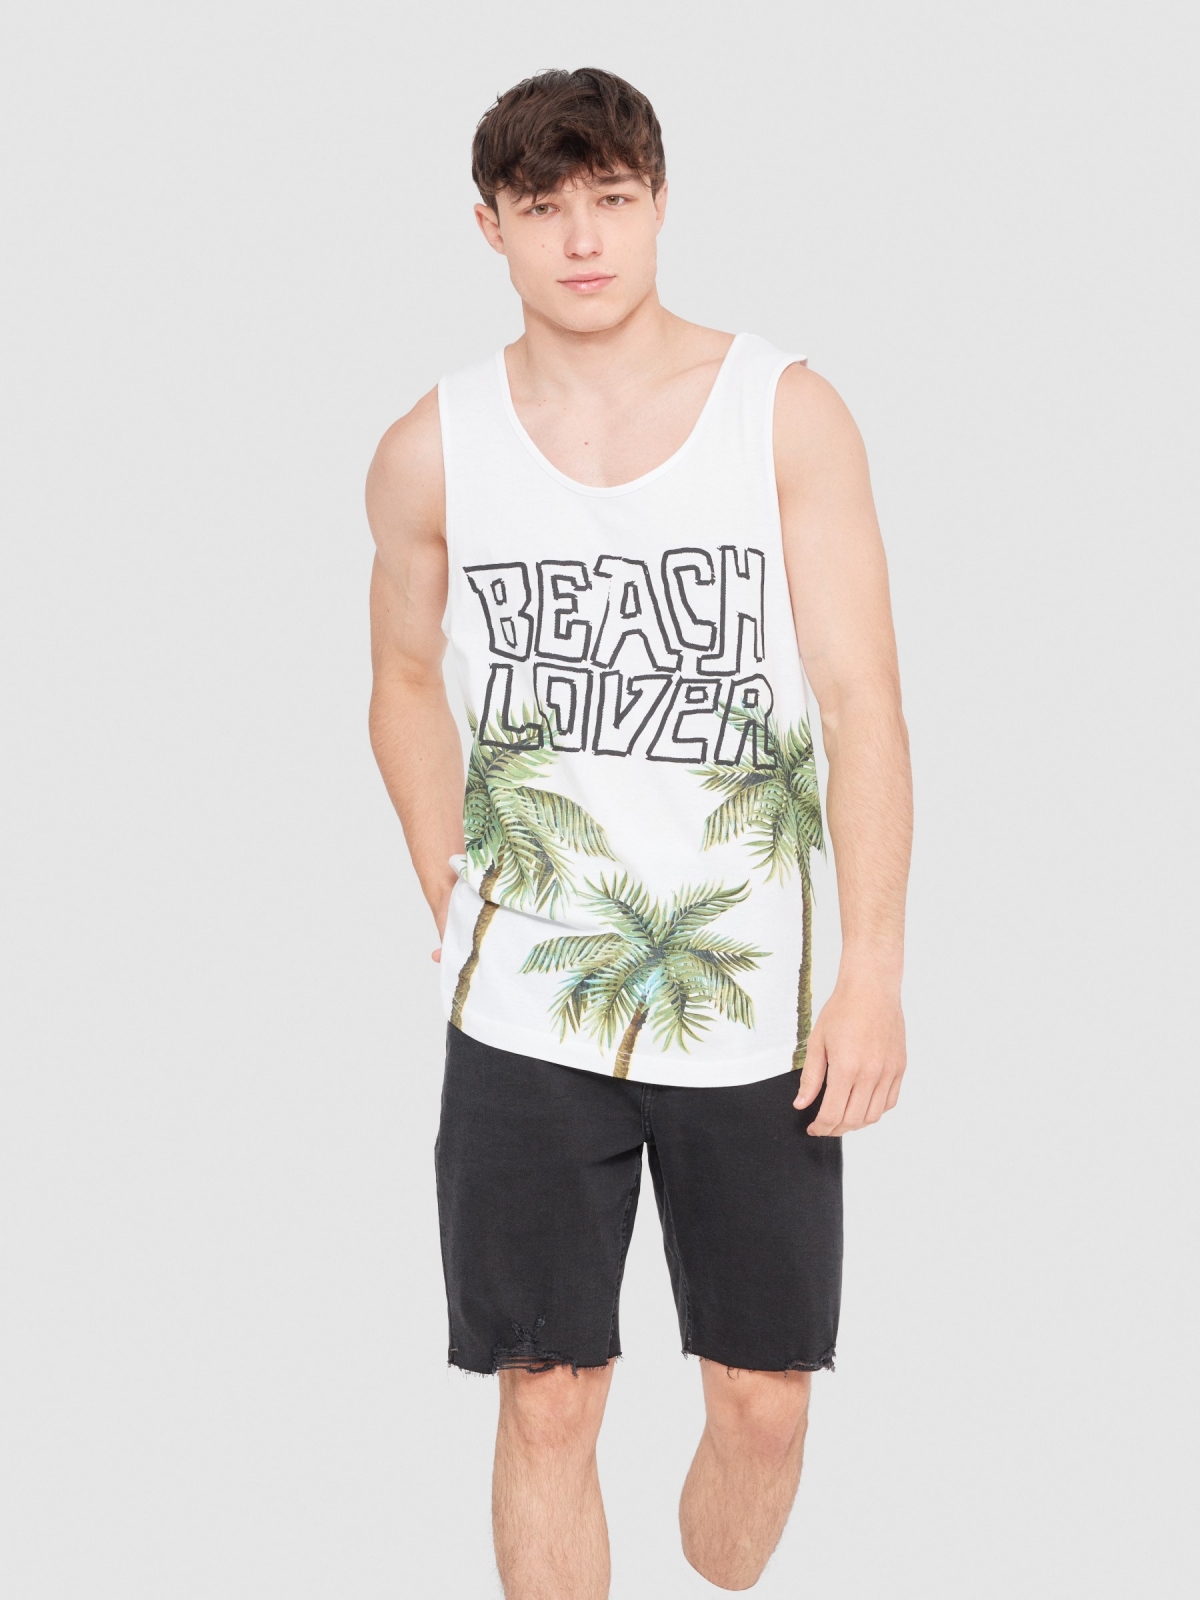 Beach lover tank top white middle front view